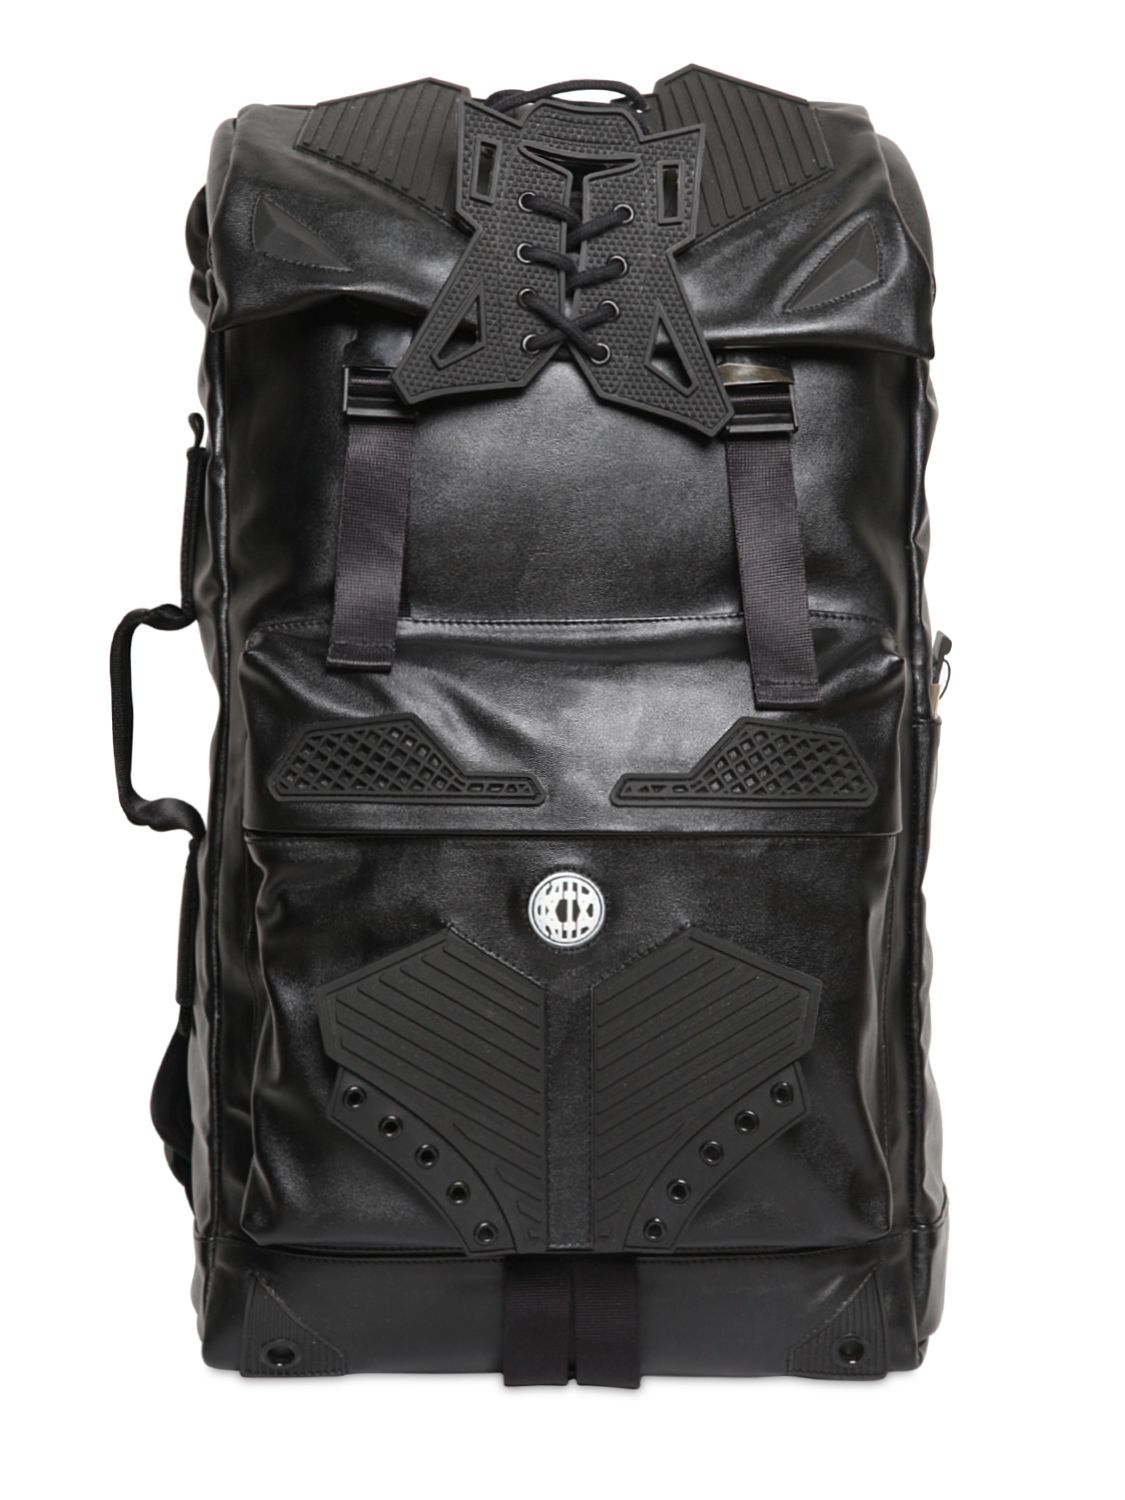 Ktz Lace-up Faux Leather Backpack in Black for Men - Lyst